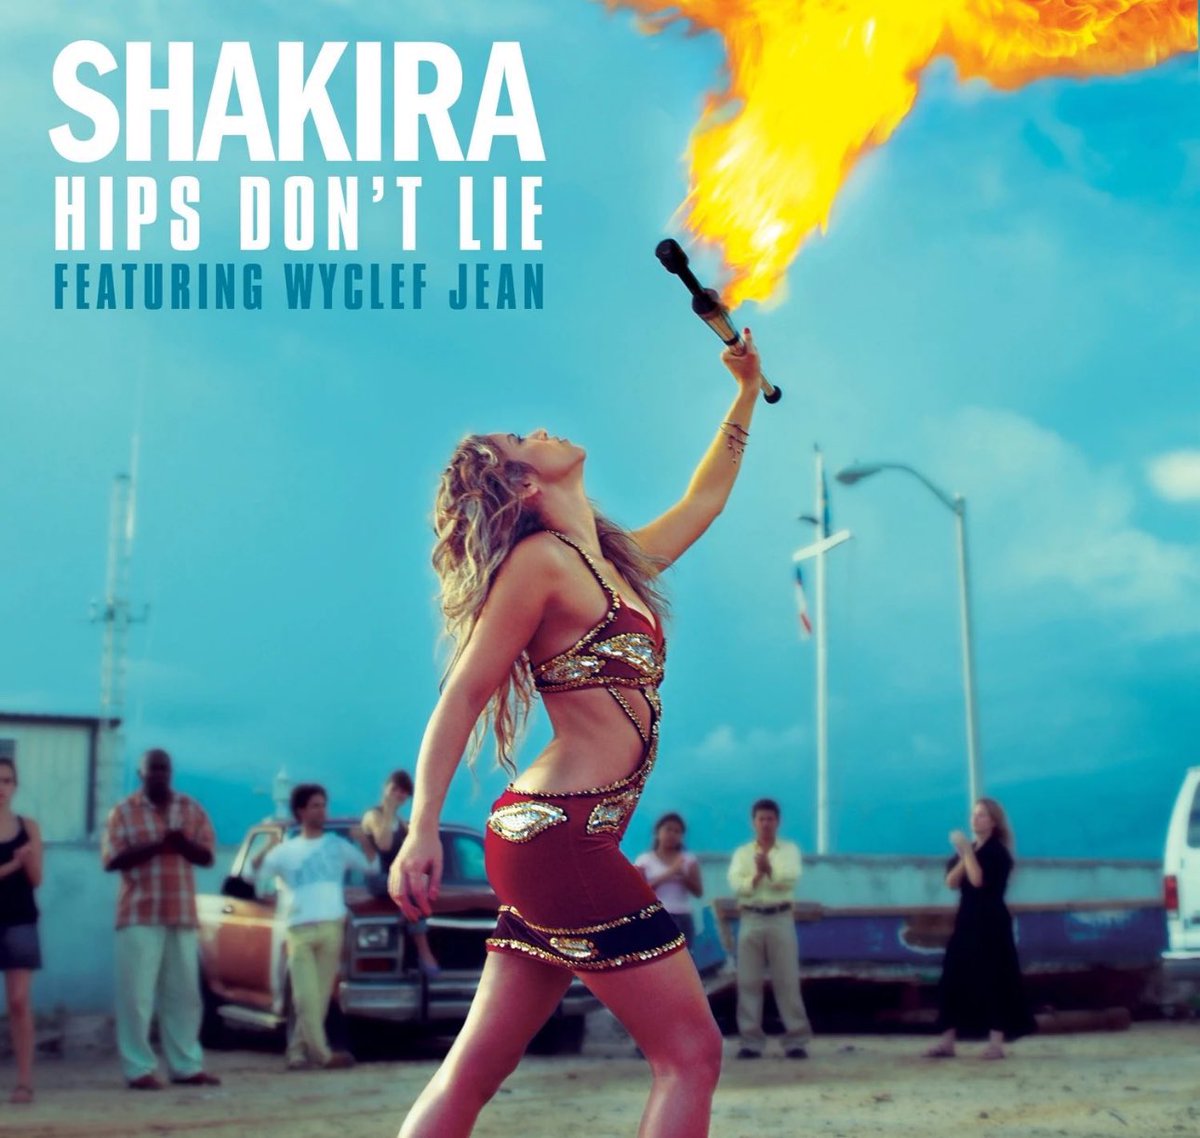 “Hips Don’t Lie” by #Shakira feat. #WyclefJean has reached 1.5 BILLION streams on #Spotify.

The artists’ most-streamed song on the platform.